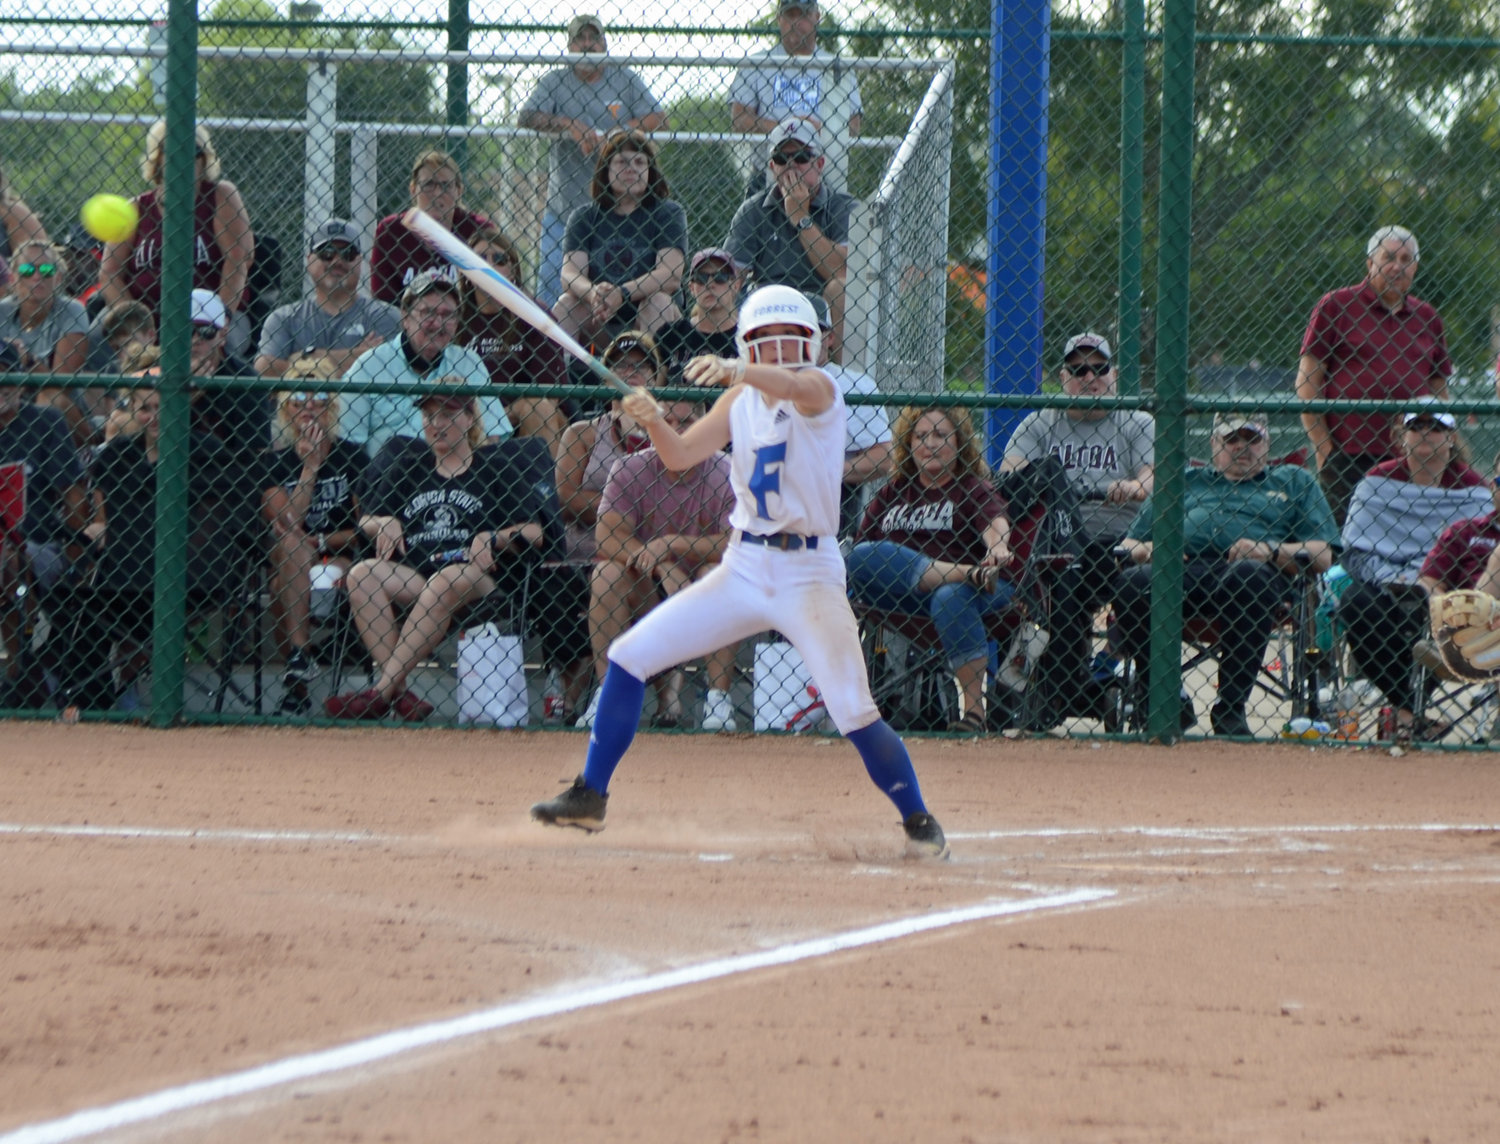 Forrest’s lone senior Addison Bunty had two out of the four hits in the championship game versus Alcoa.